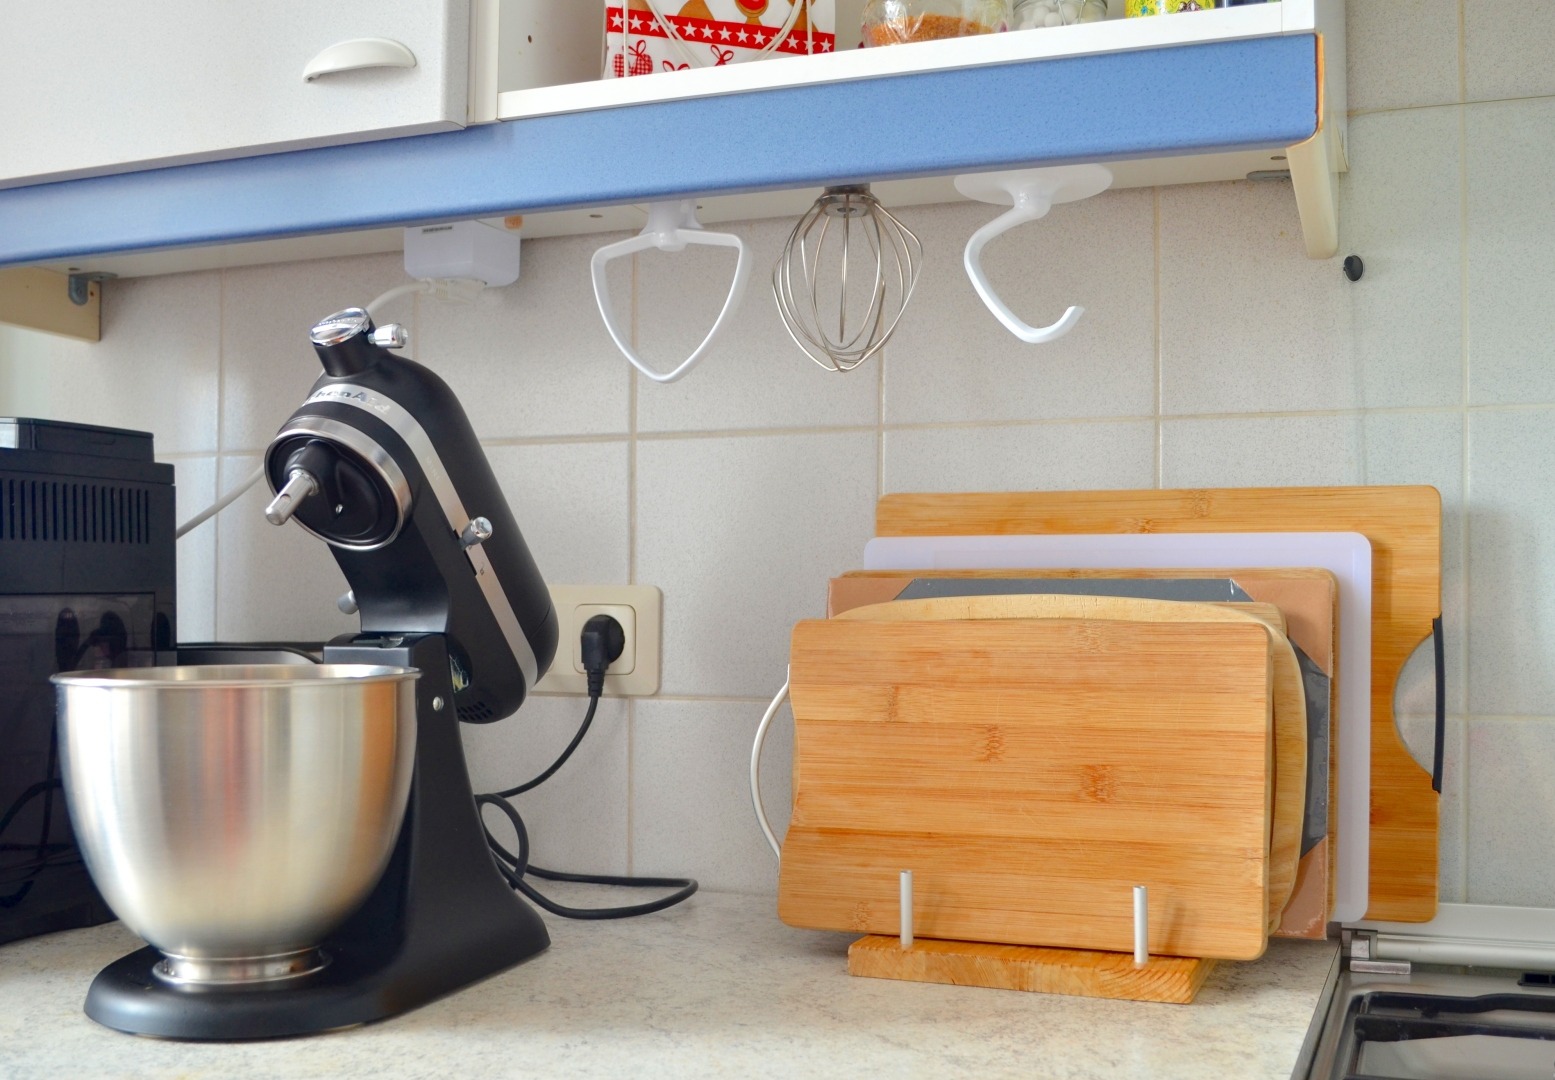 DIY KitchenAid attachments holder (dimensions and building) - DIY Projects